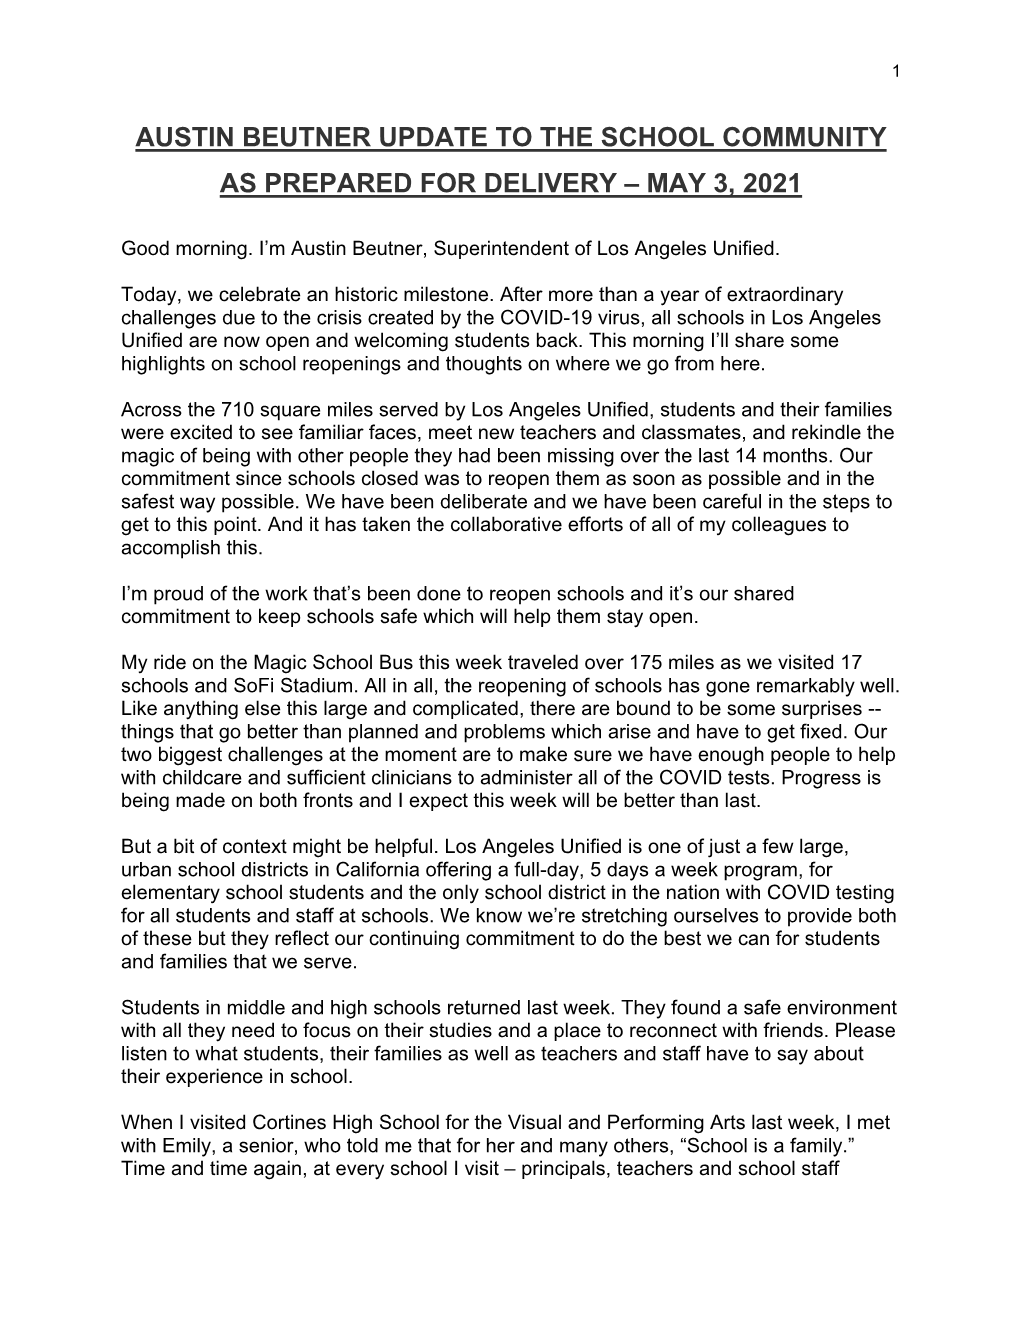 Austin Beutner Update to the School Community As Prepared for Delivery – May 3, 2021